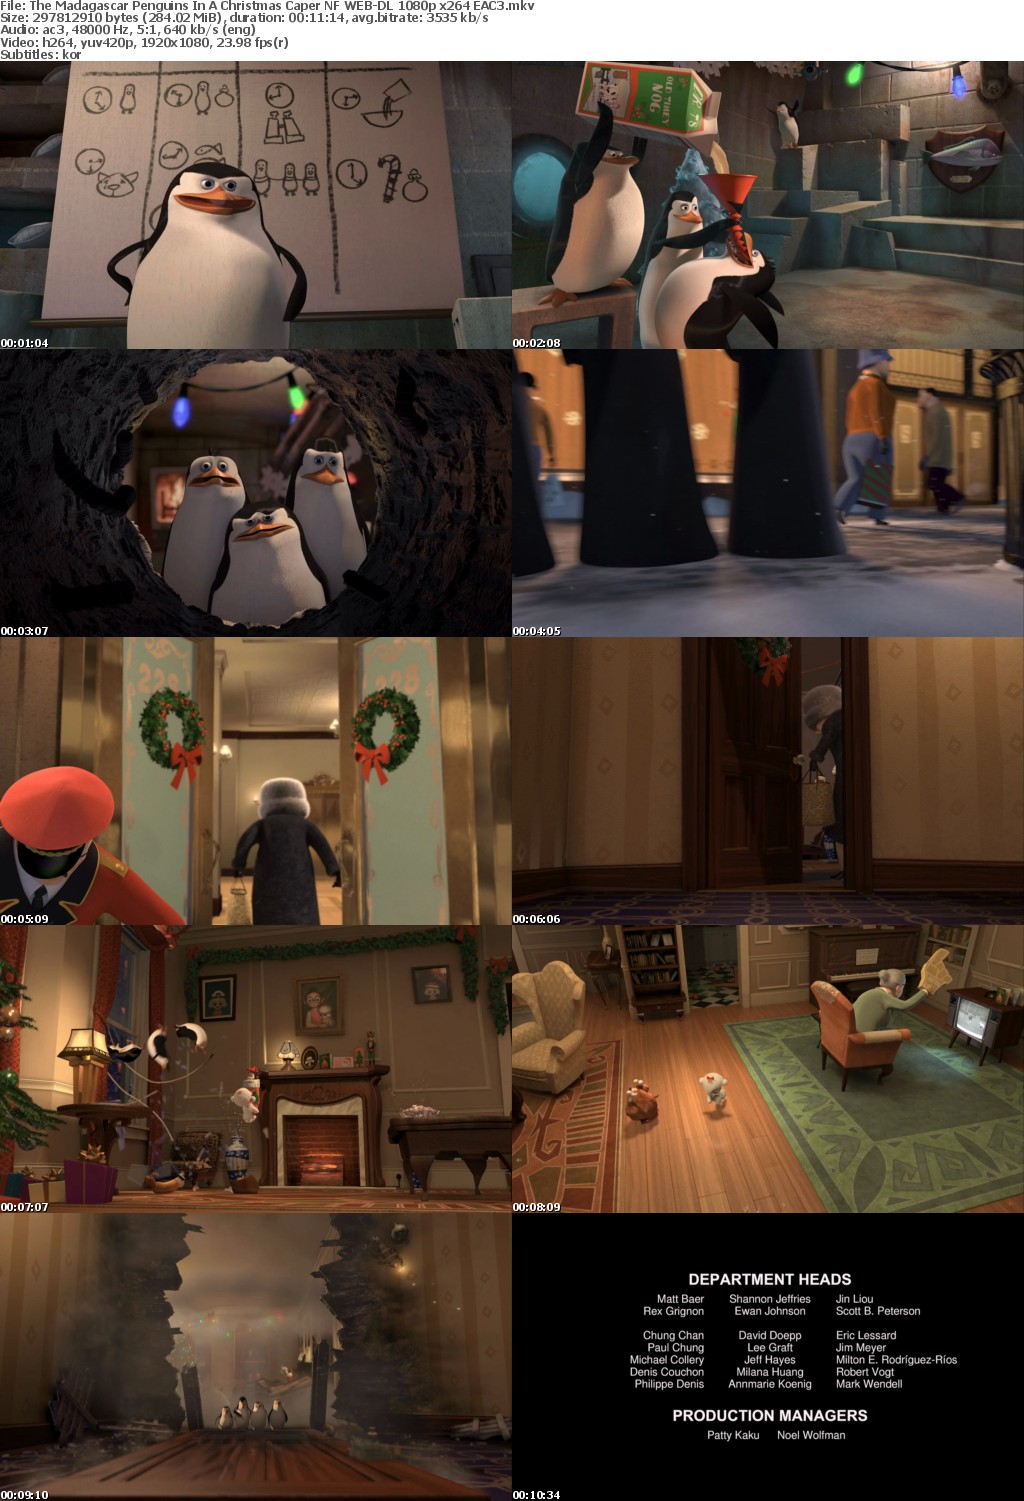 The Madagascar Penguins In A Christmas Caper NF WEB-DL 1080p x264 EAC3 mkv